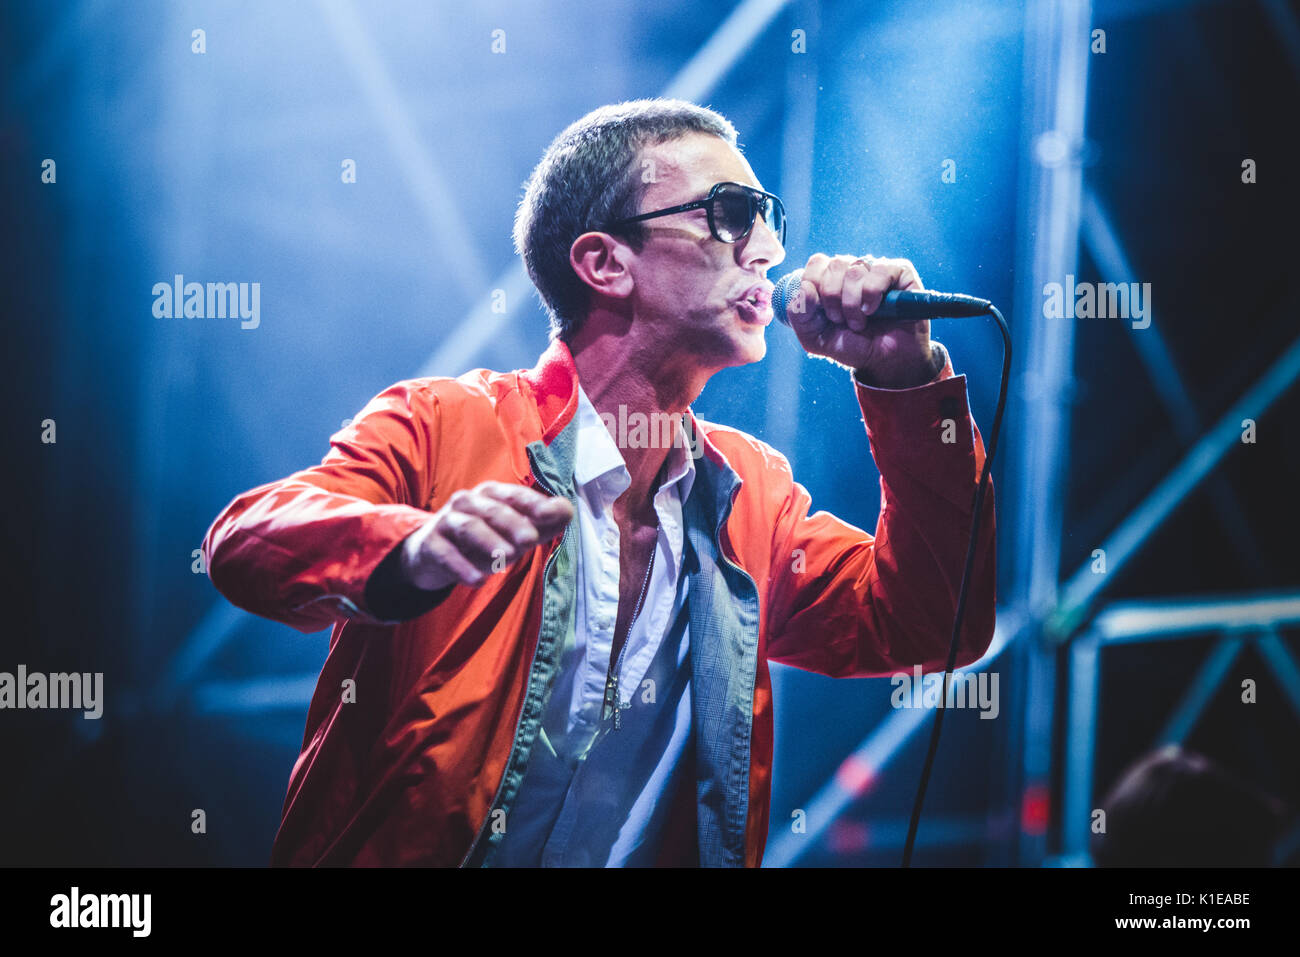 Torino, Italy. 26th Aug, 2017: Richard Ashcroft performing live on stage at the TODays Festival in Torino Credit: Alessandro Bosio/Alamy Live News Stock Photo